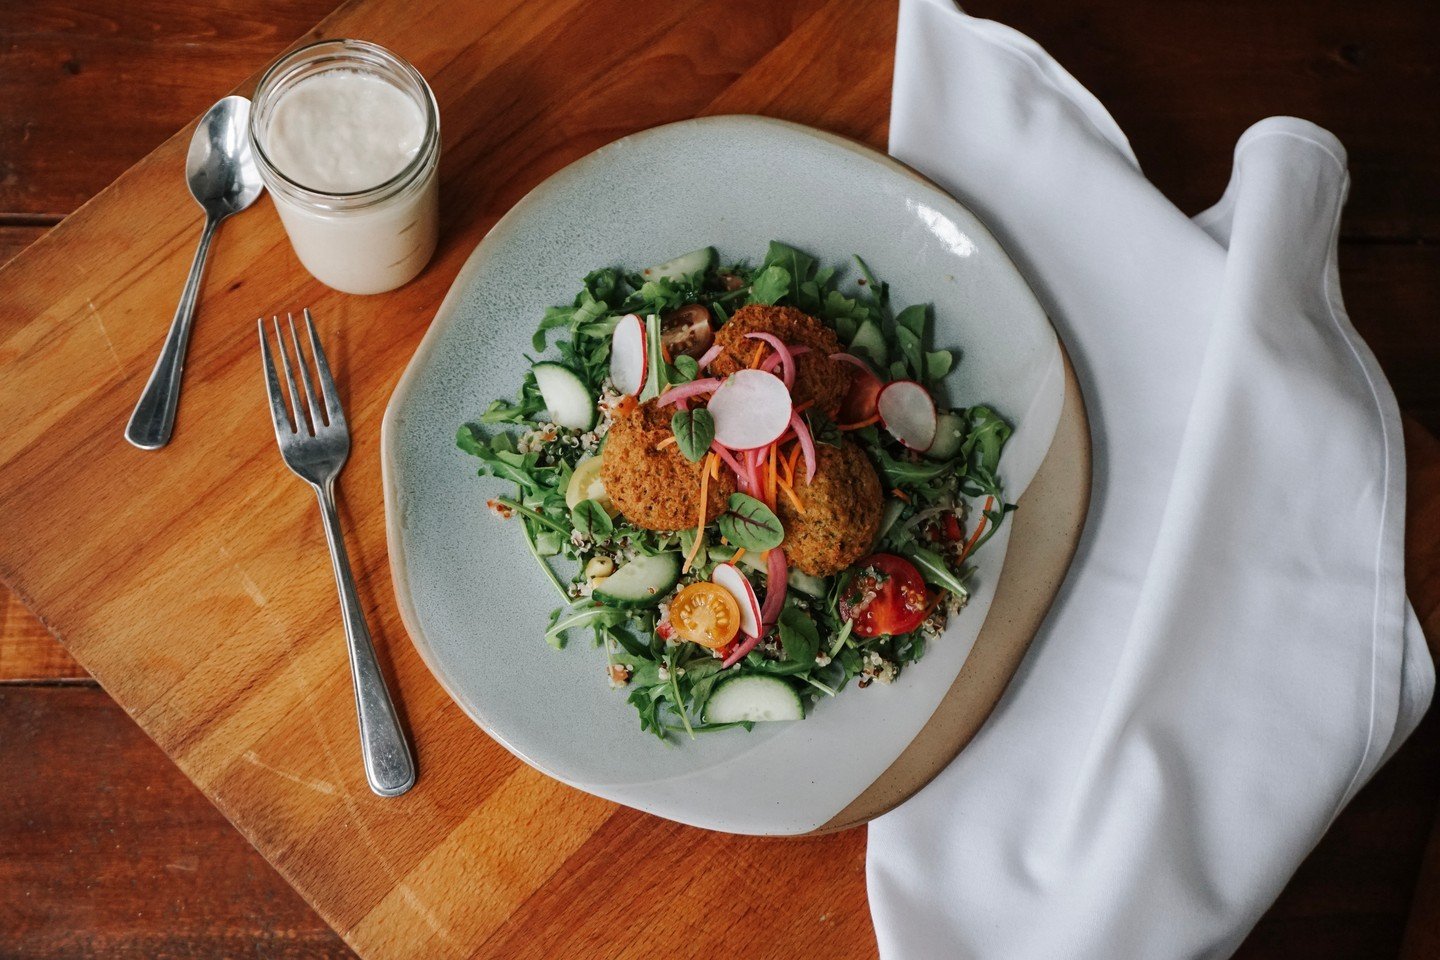 🌿 Introducing our new Nourish Bowl! 🌿 Featuring kale falafel, quinoa tabbouleh, crisp cucumber, heirloom tomatoes, carrots, radishes, pickled onions, topped with our zesty lemon tahini dressing. A fresh and flavorful delight!

.
.
.

#peake #peakeo